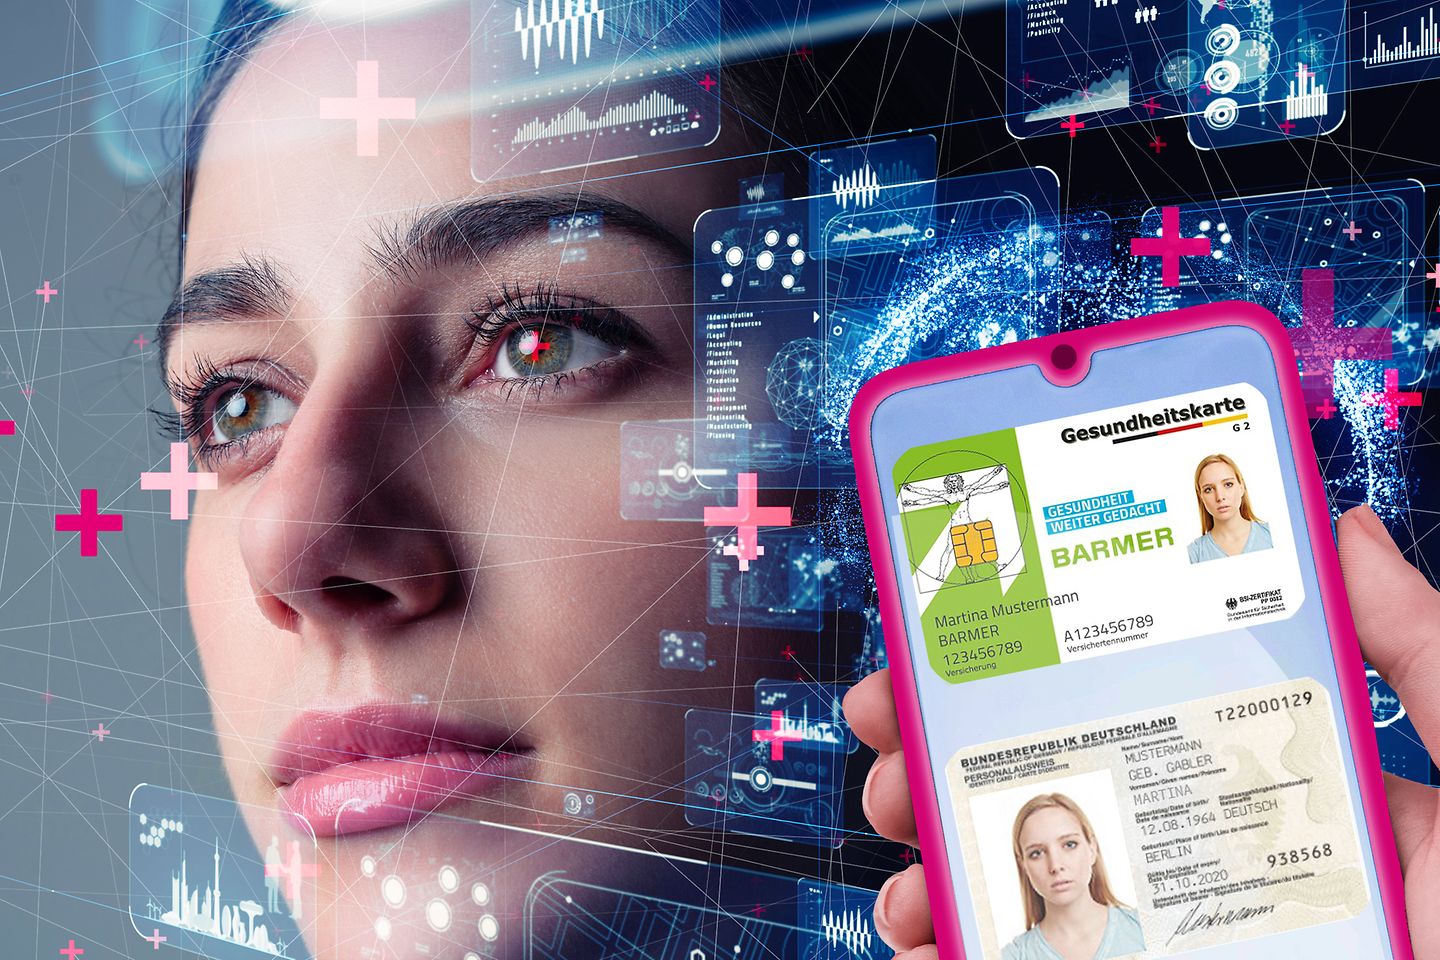 Face of a woman with digital overlay and smartphone with health card